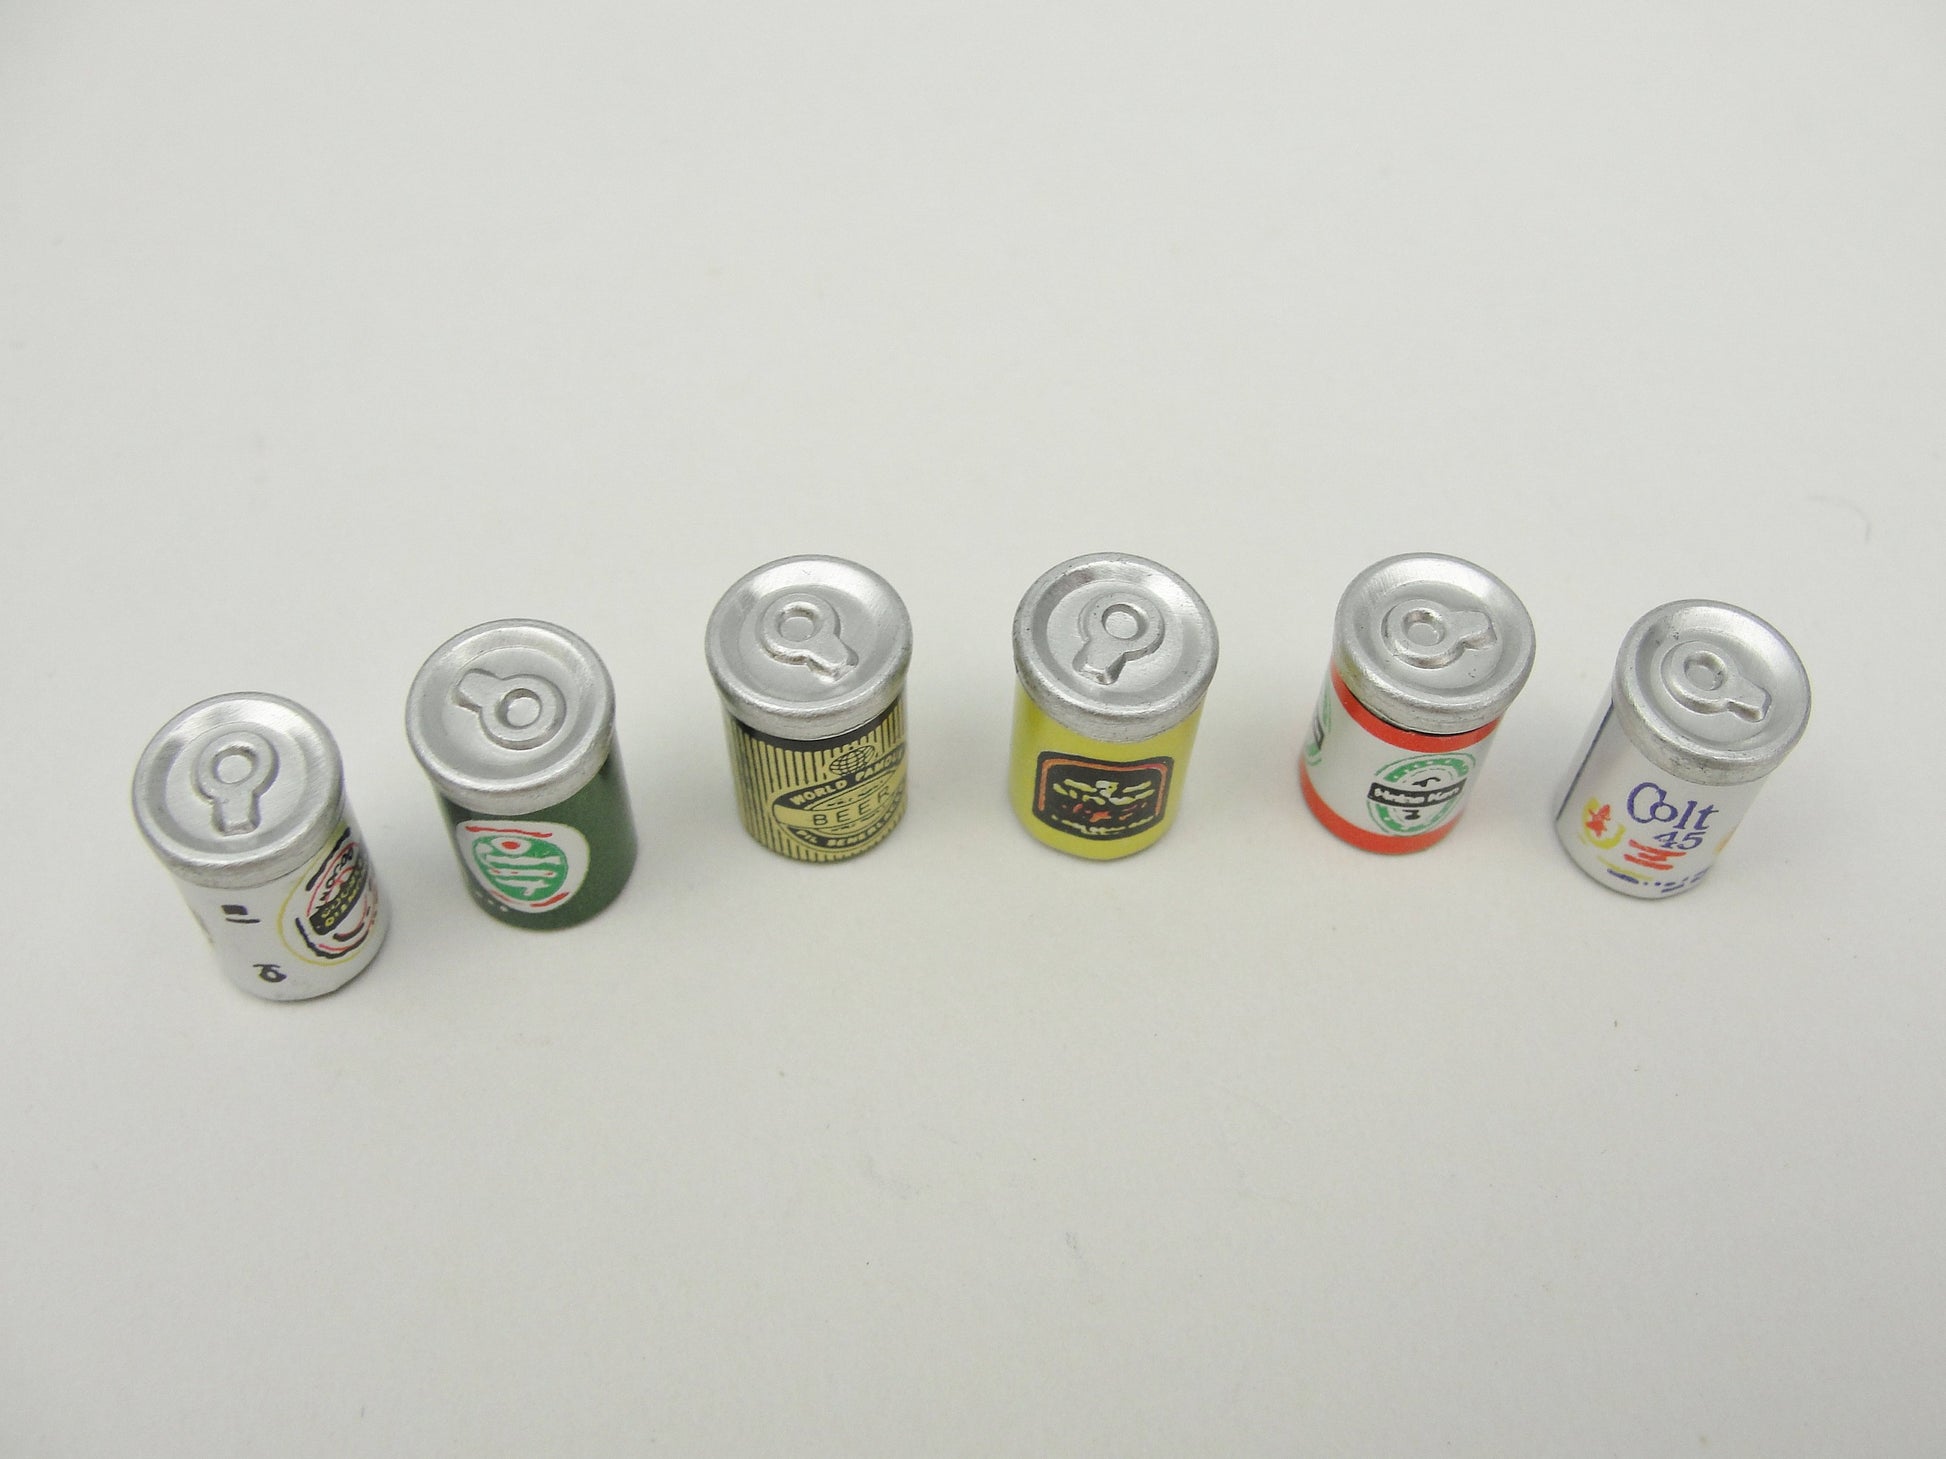 Dollhouse beer cans set of 6 - Miniatures - Craft Supply House